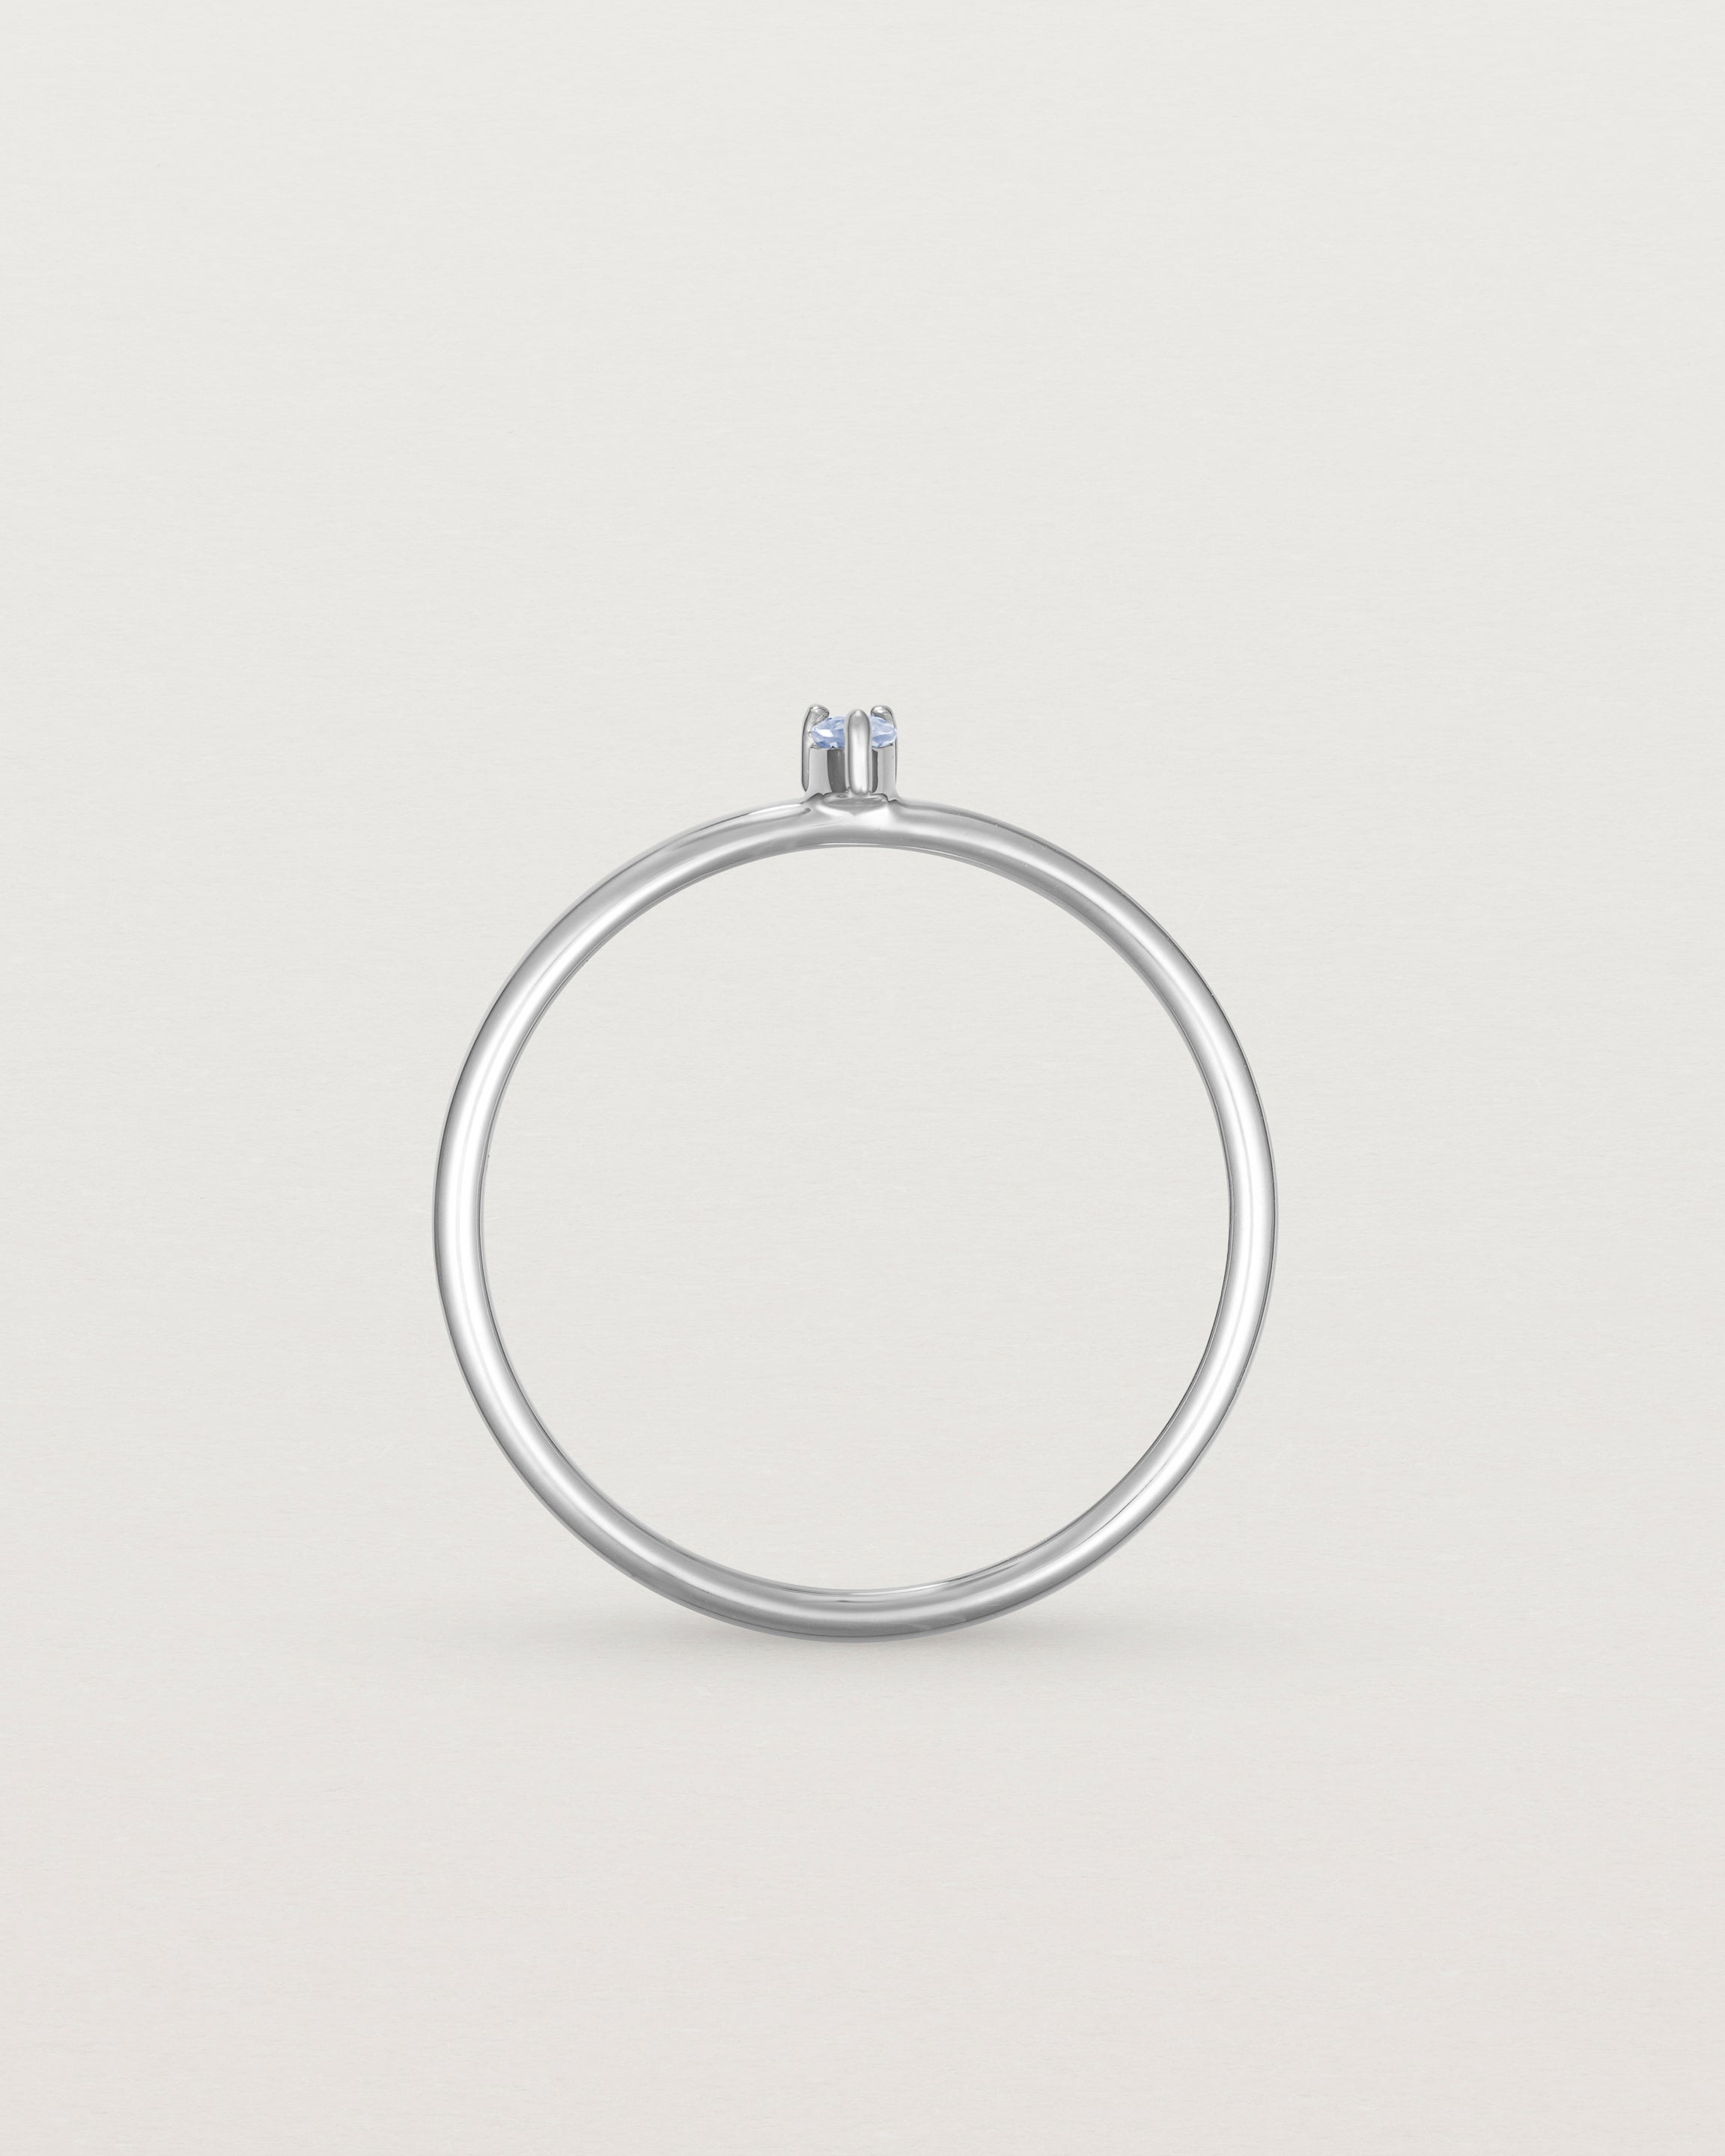 Standing view of the Danaë Stacking Ring | Sapphire in white gold.